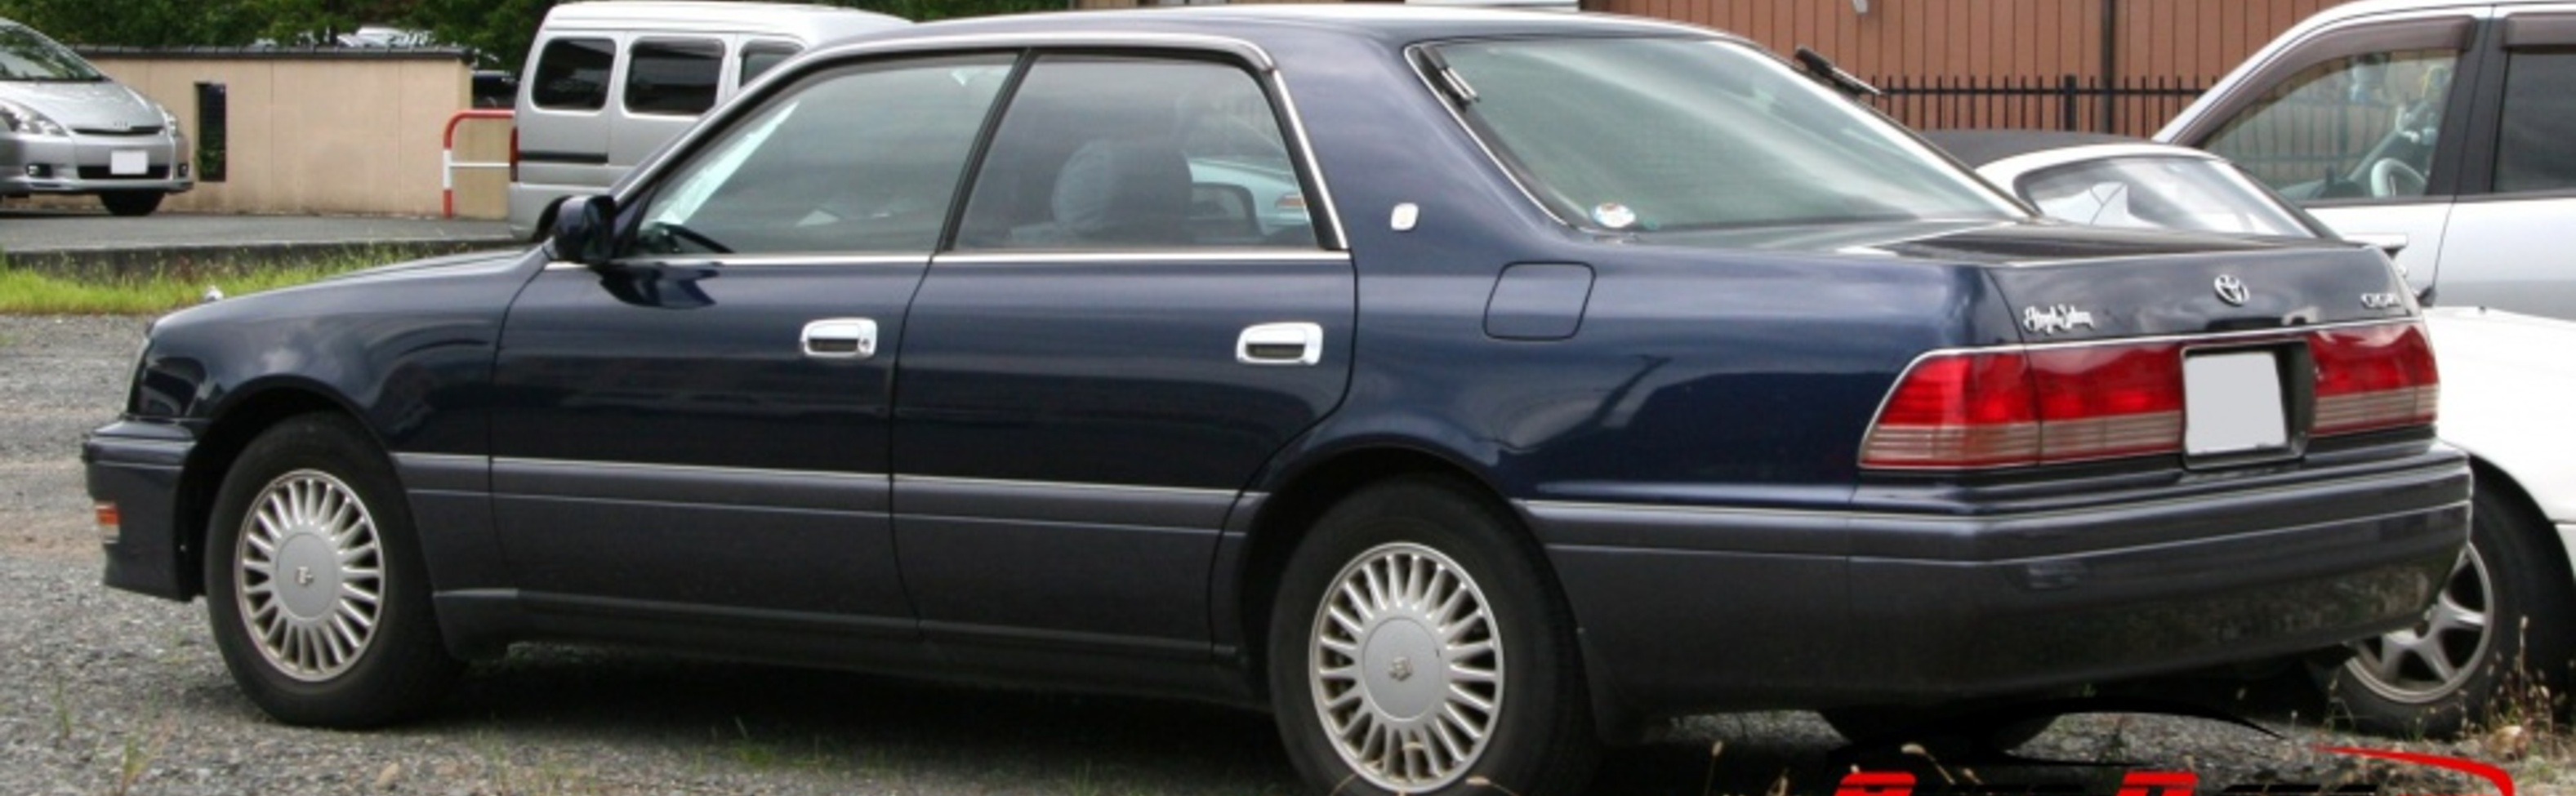 Toyota Crown Royal X (S150, facelift 1997) 3.0i 24V (220 Hp) Automatic 1997, 1998, 1999 